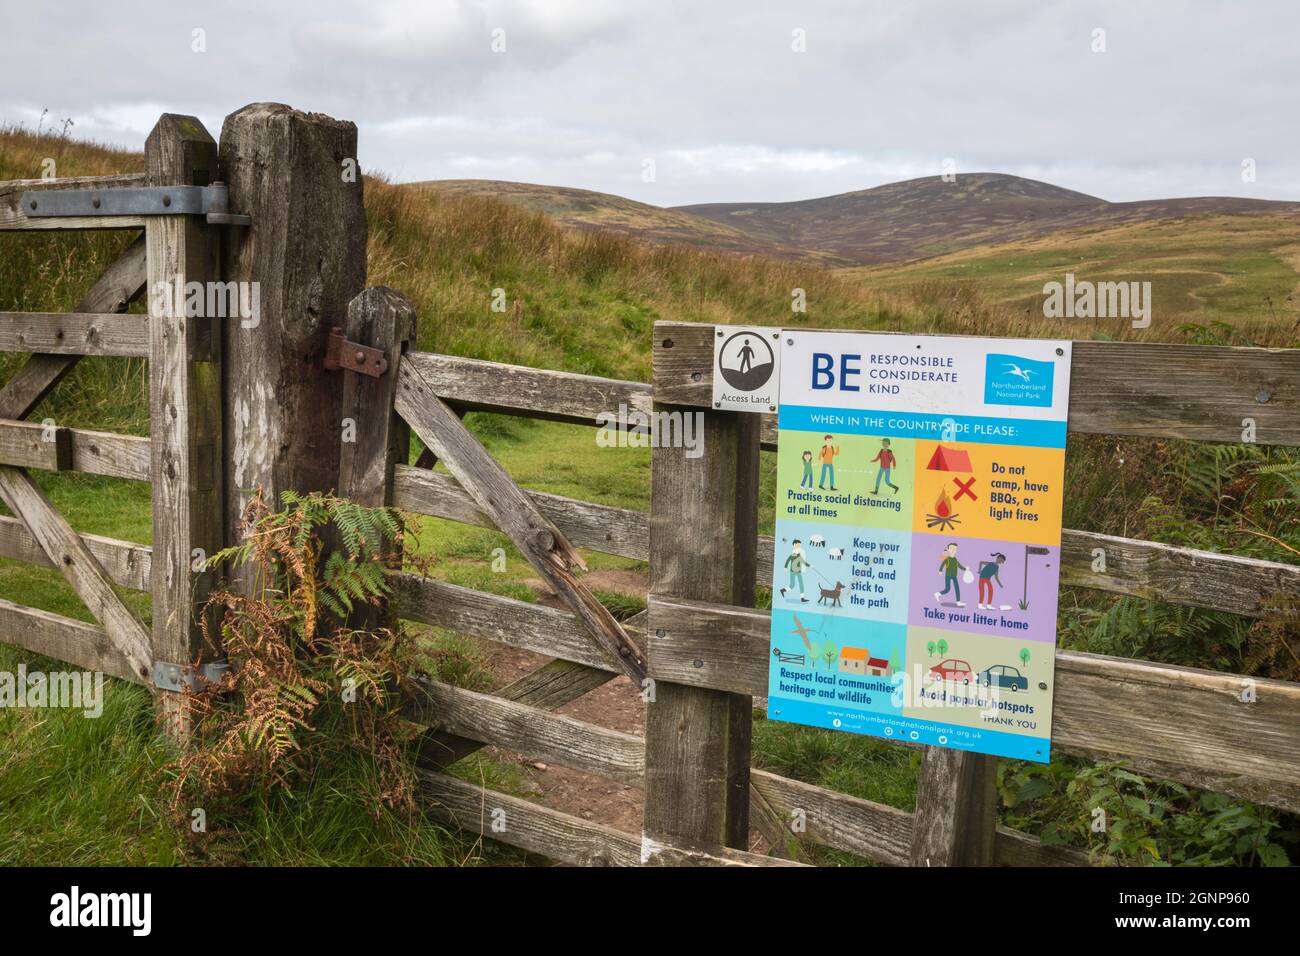 Countryside code in Covid-19 pandemic, Breamish valley, Northumberland national park, UK Stock Photo